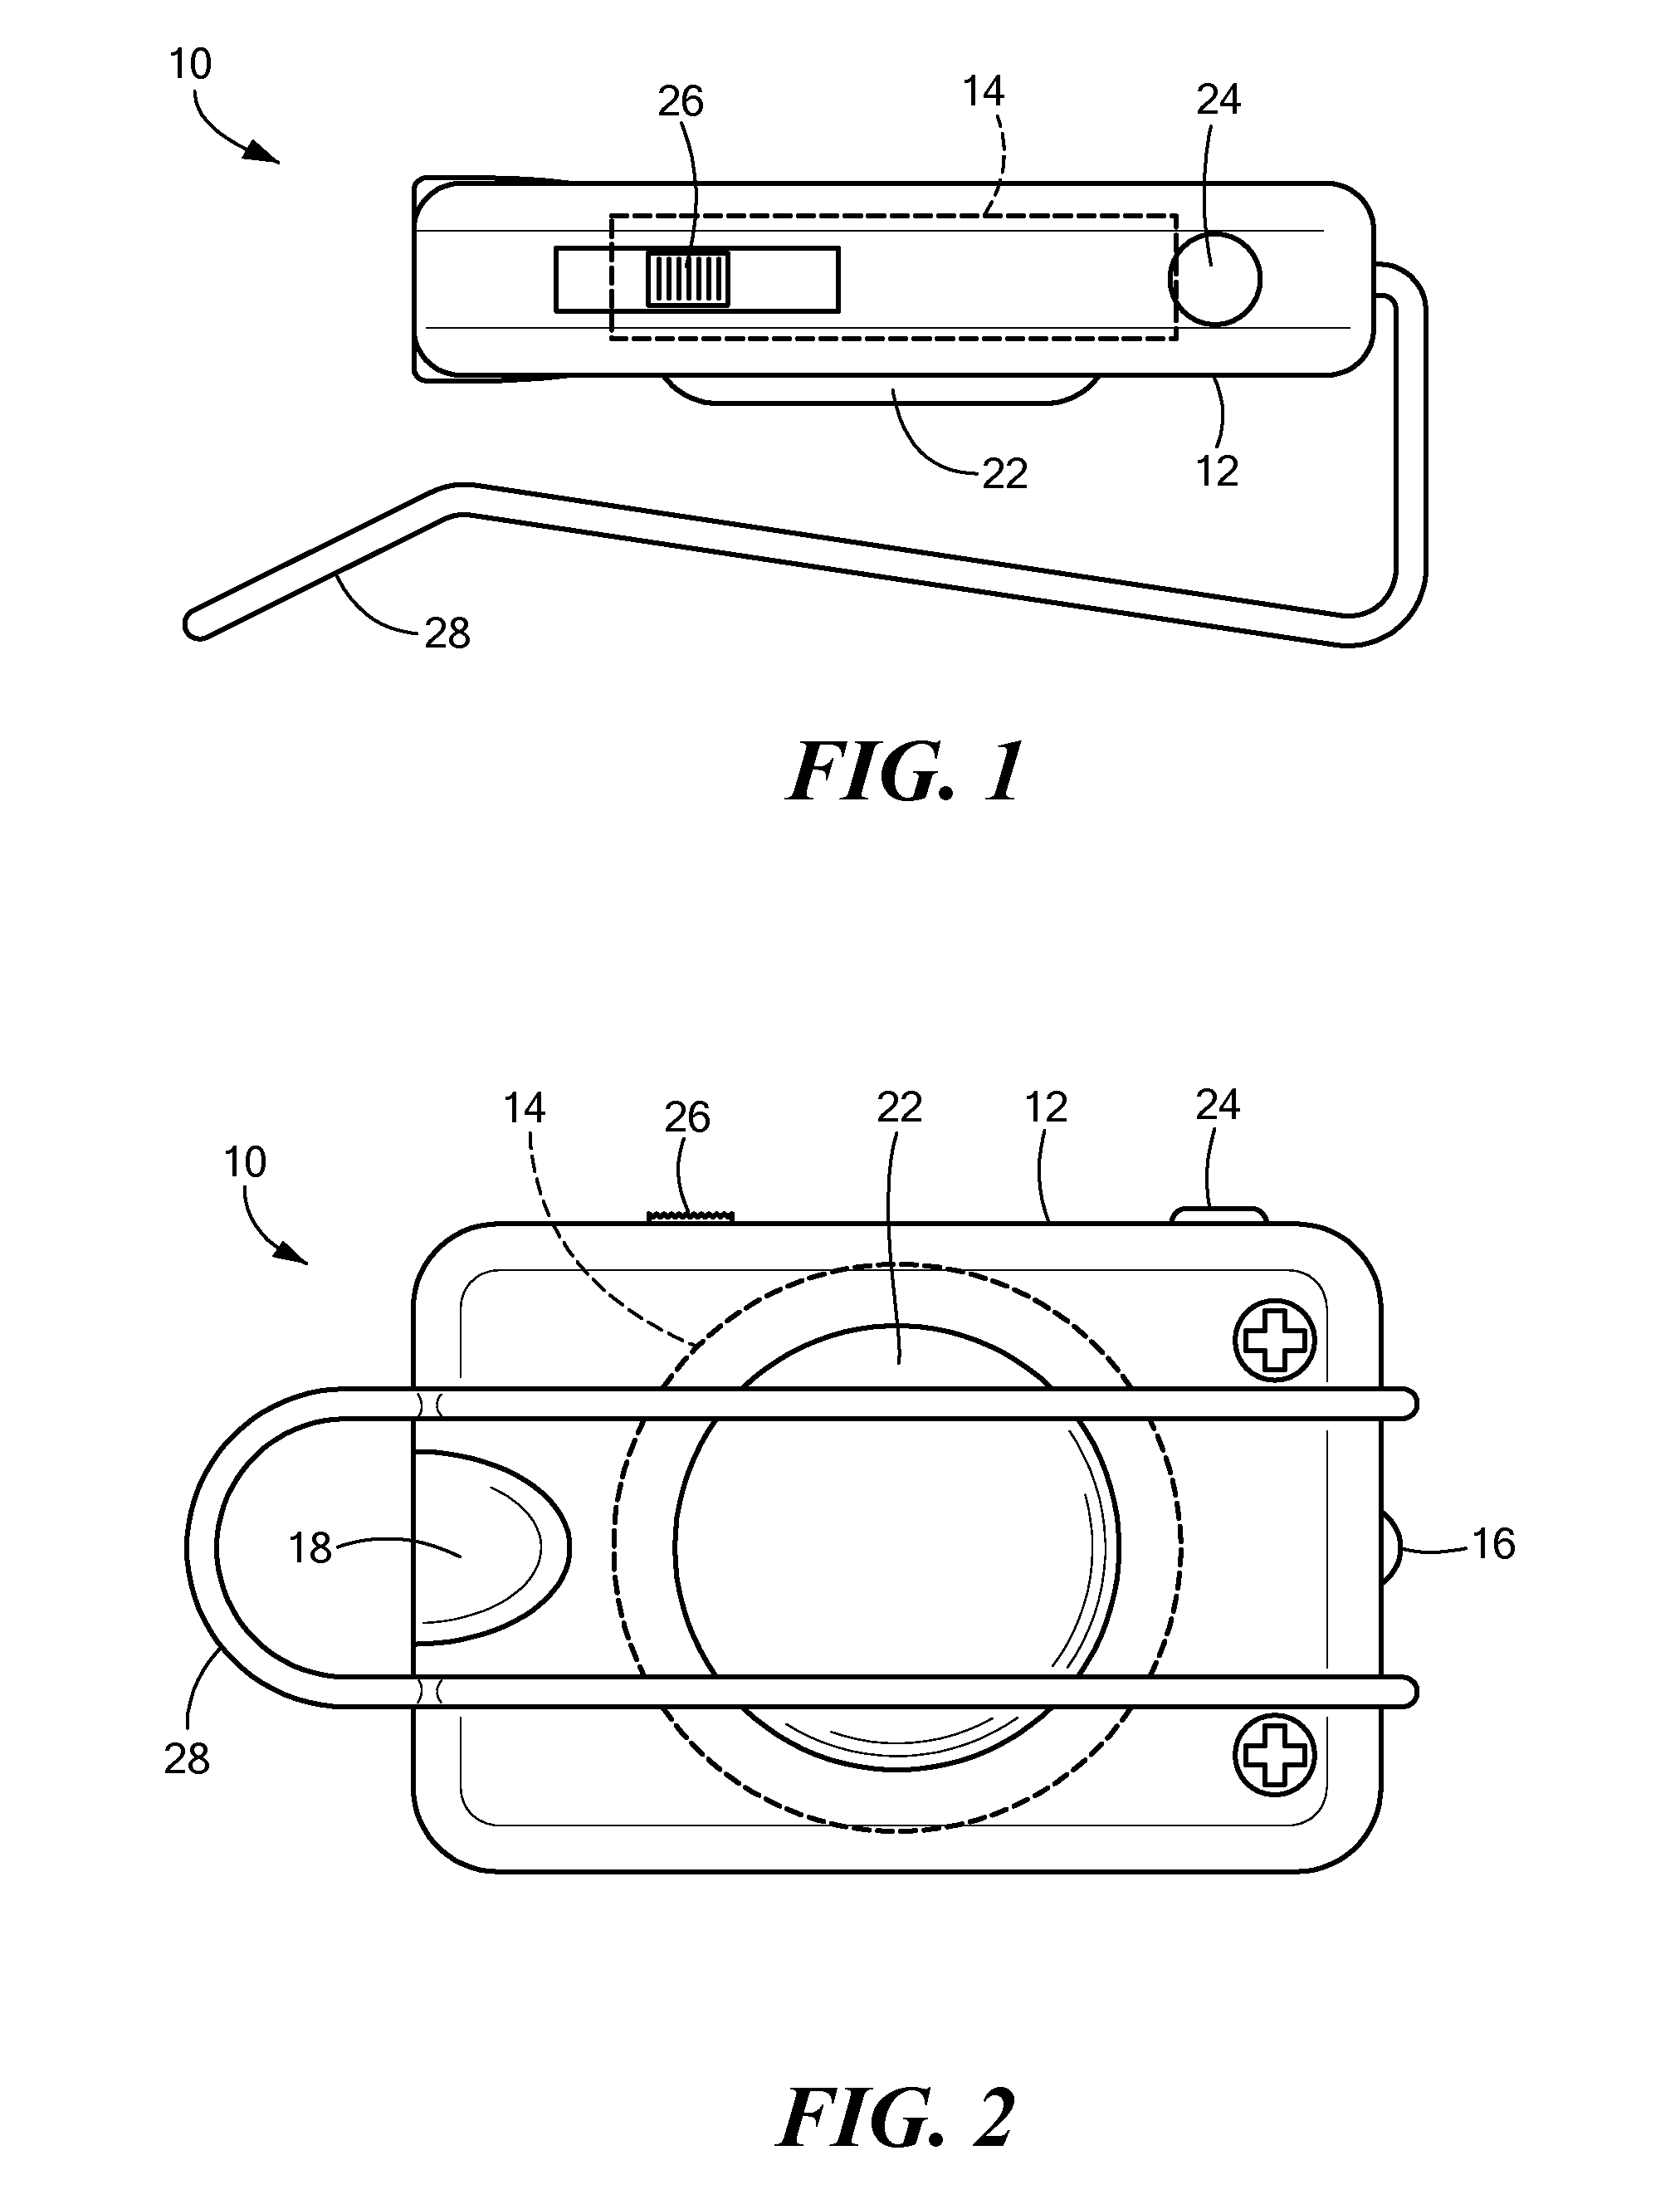 Method and apparatus for exercising abdominal muscles